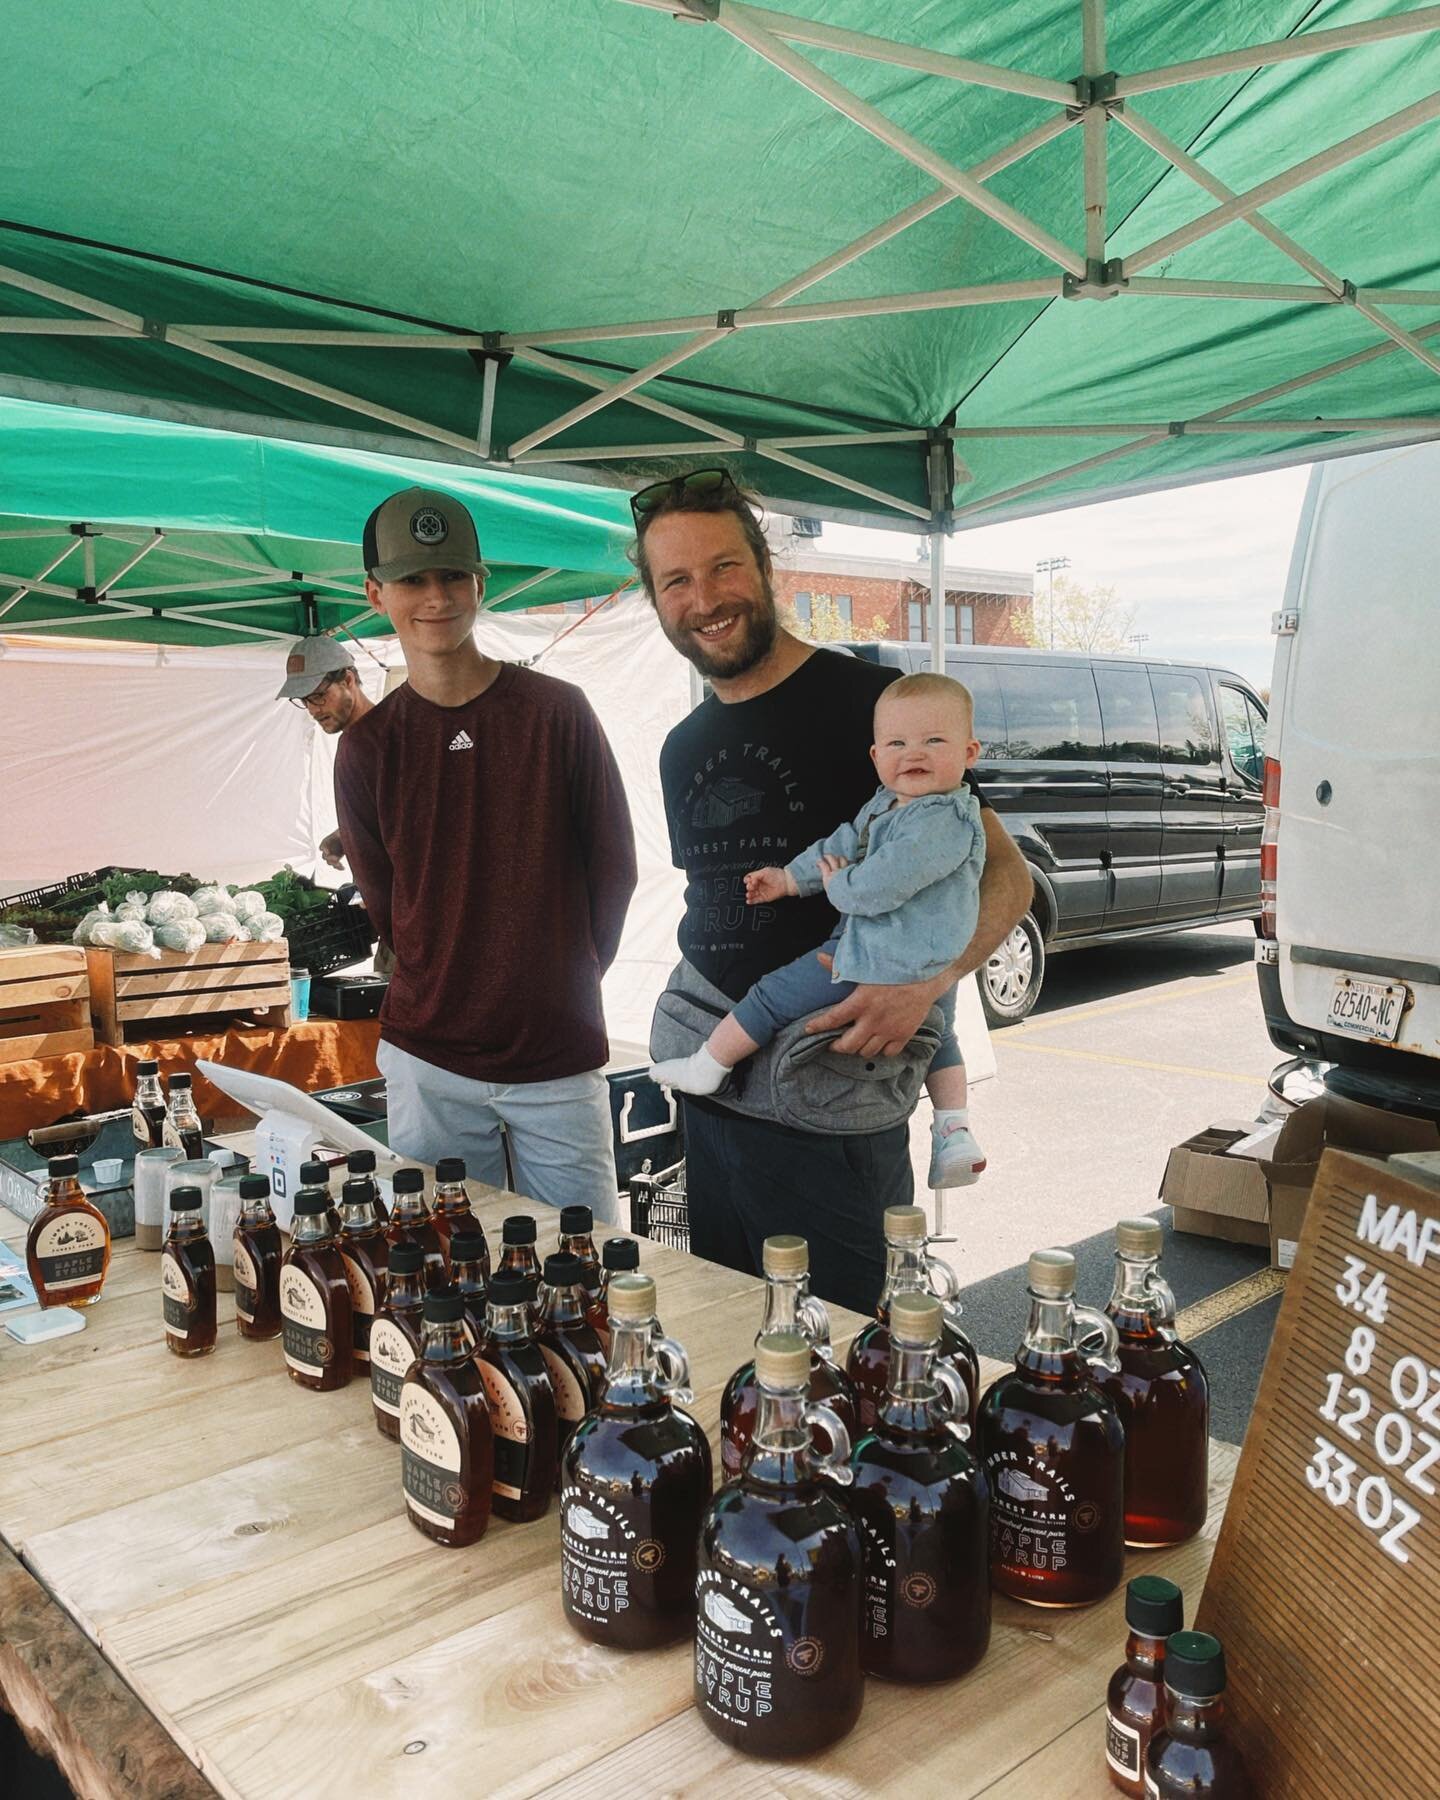 Having fun on this beautiful day at the @brightonfarmers market! Come say hi and try some syrup! ☀️🍁⚡️